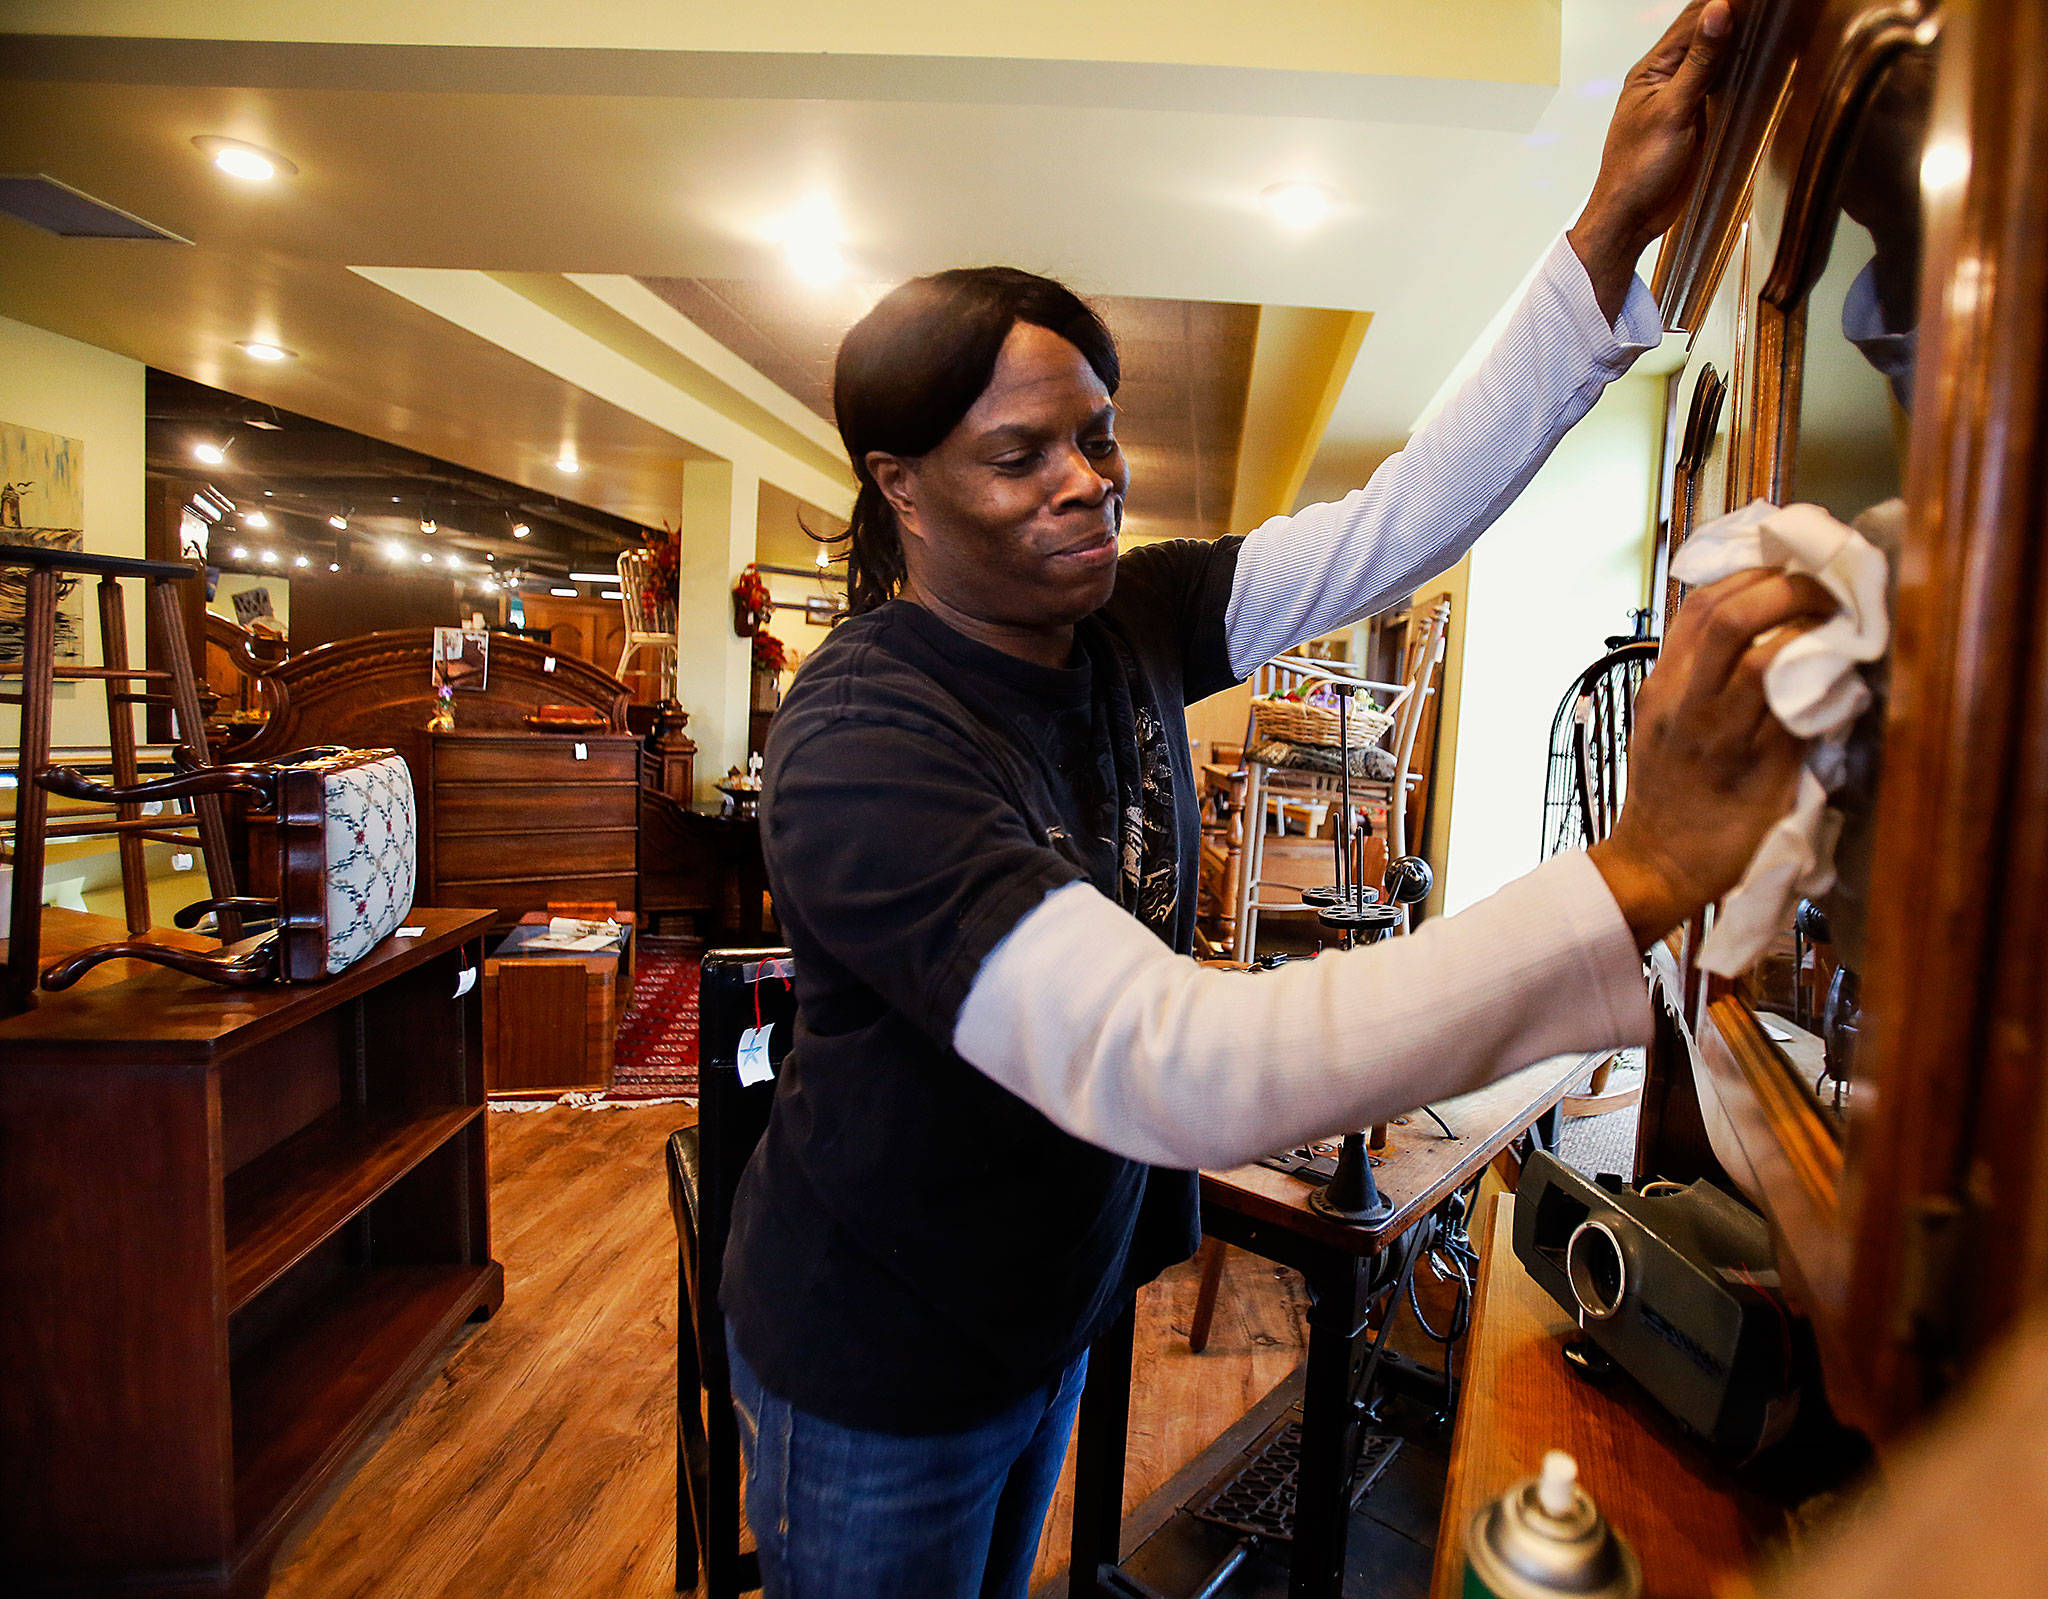 Nina White, 48, on the job caring for furniture at ReNewWorks Home and Decor, a shop run by HopeWorks in Everett. White has an internship with HopeWorks Social Enterprises, an organization that helps people gain job skills. (Dan Bates / The Herald)